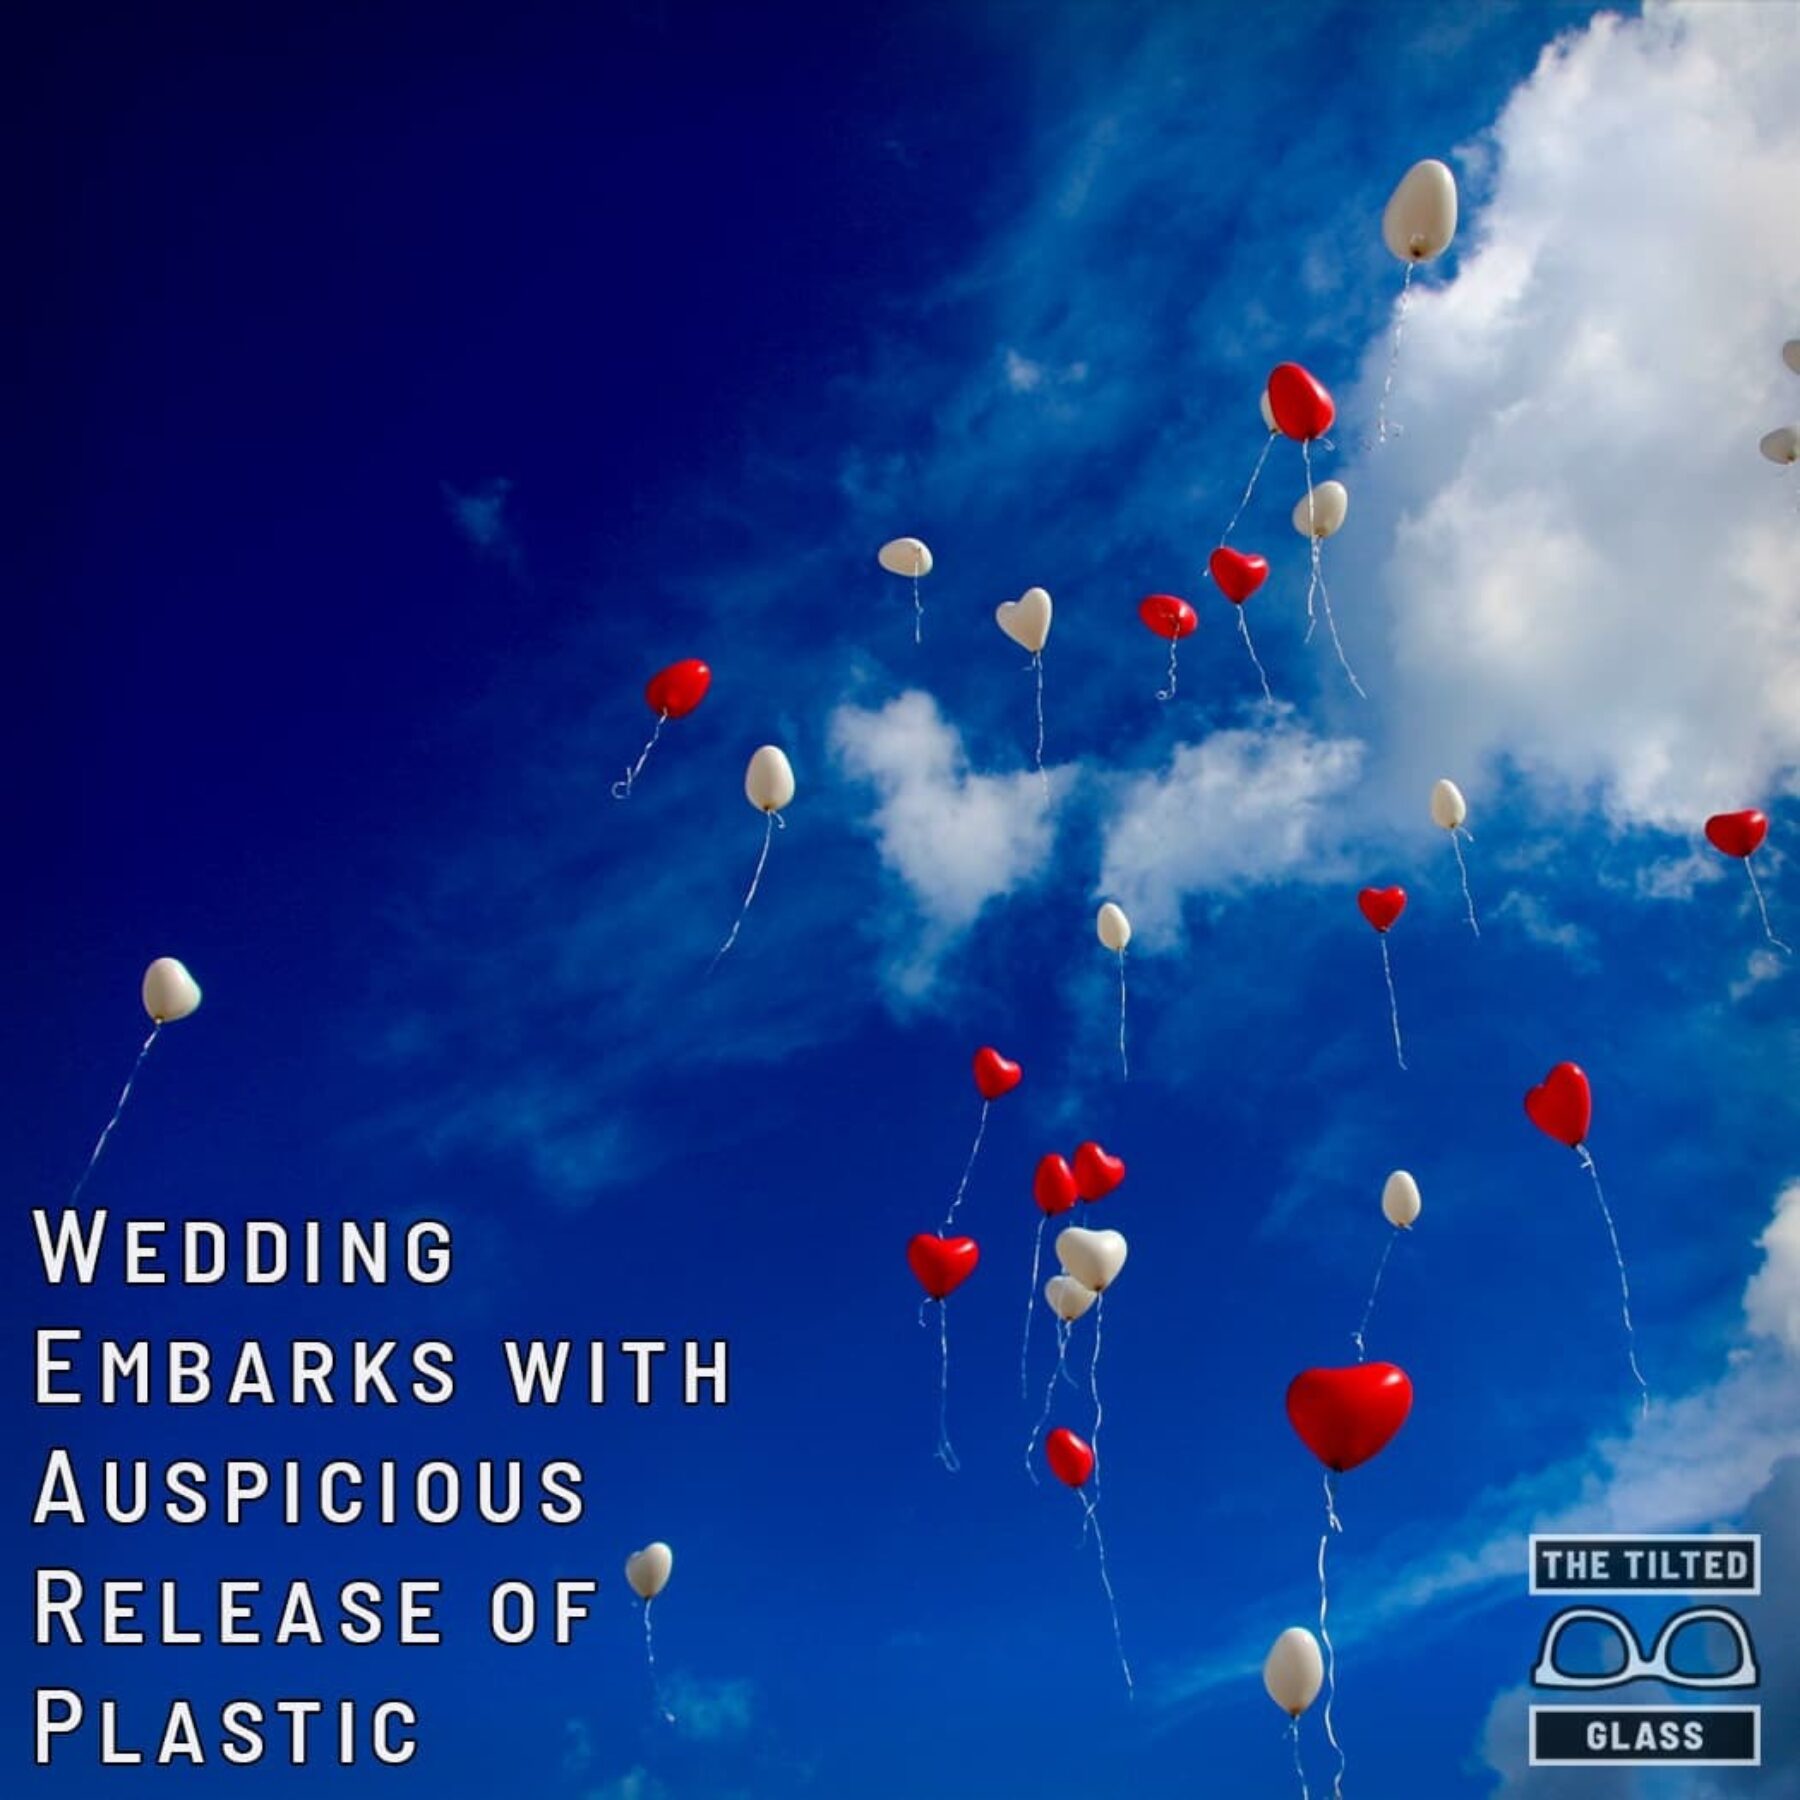 Wedding Embarks with Auspicious Release of Plastic